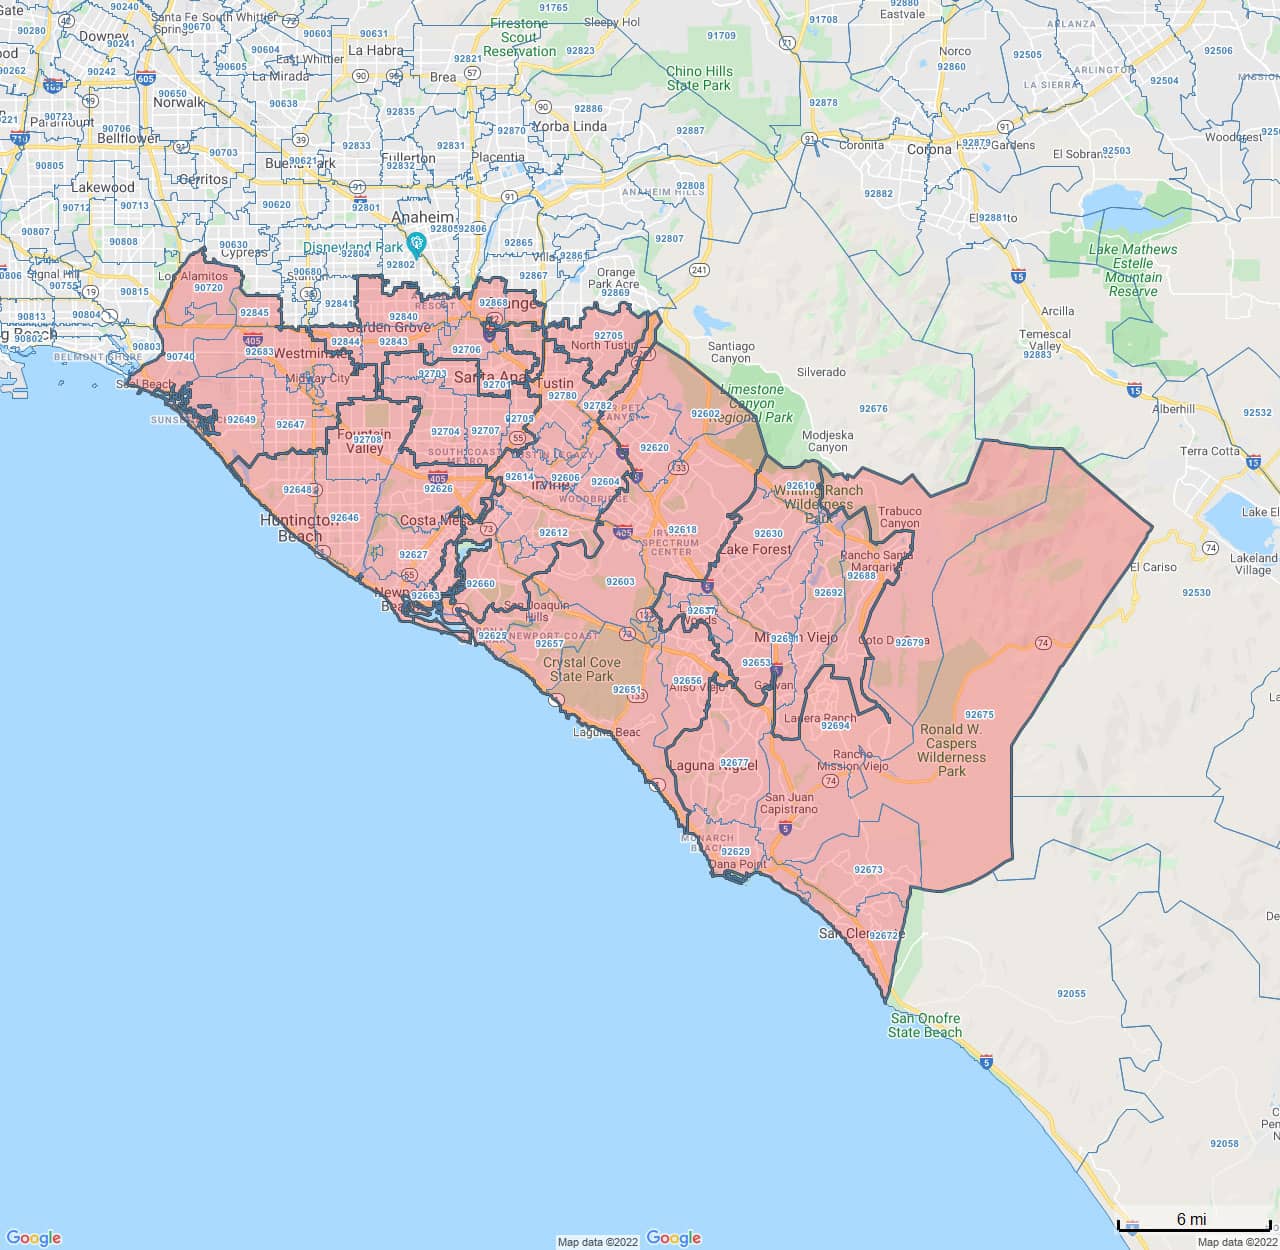 All Dry Services Area Coverage Map for Orange County, California